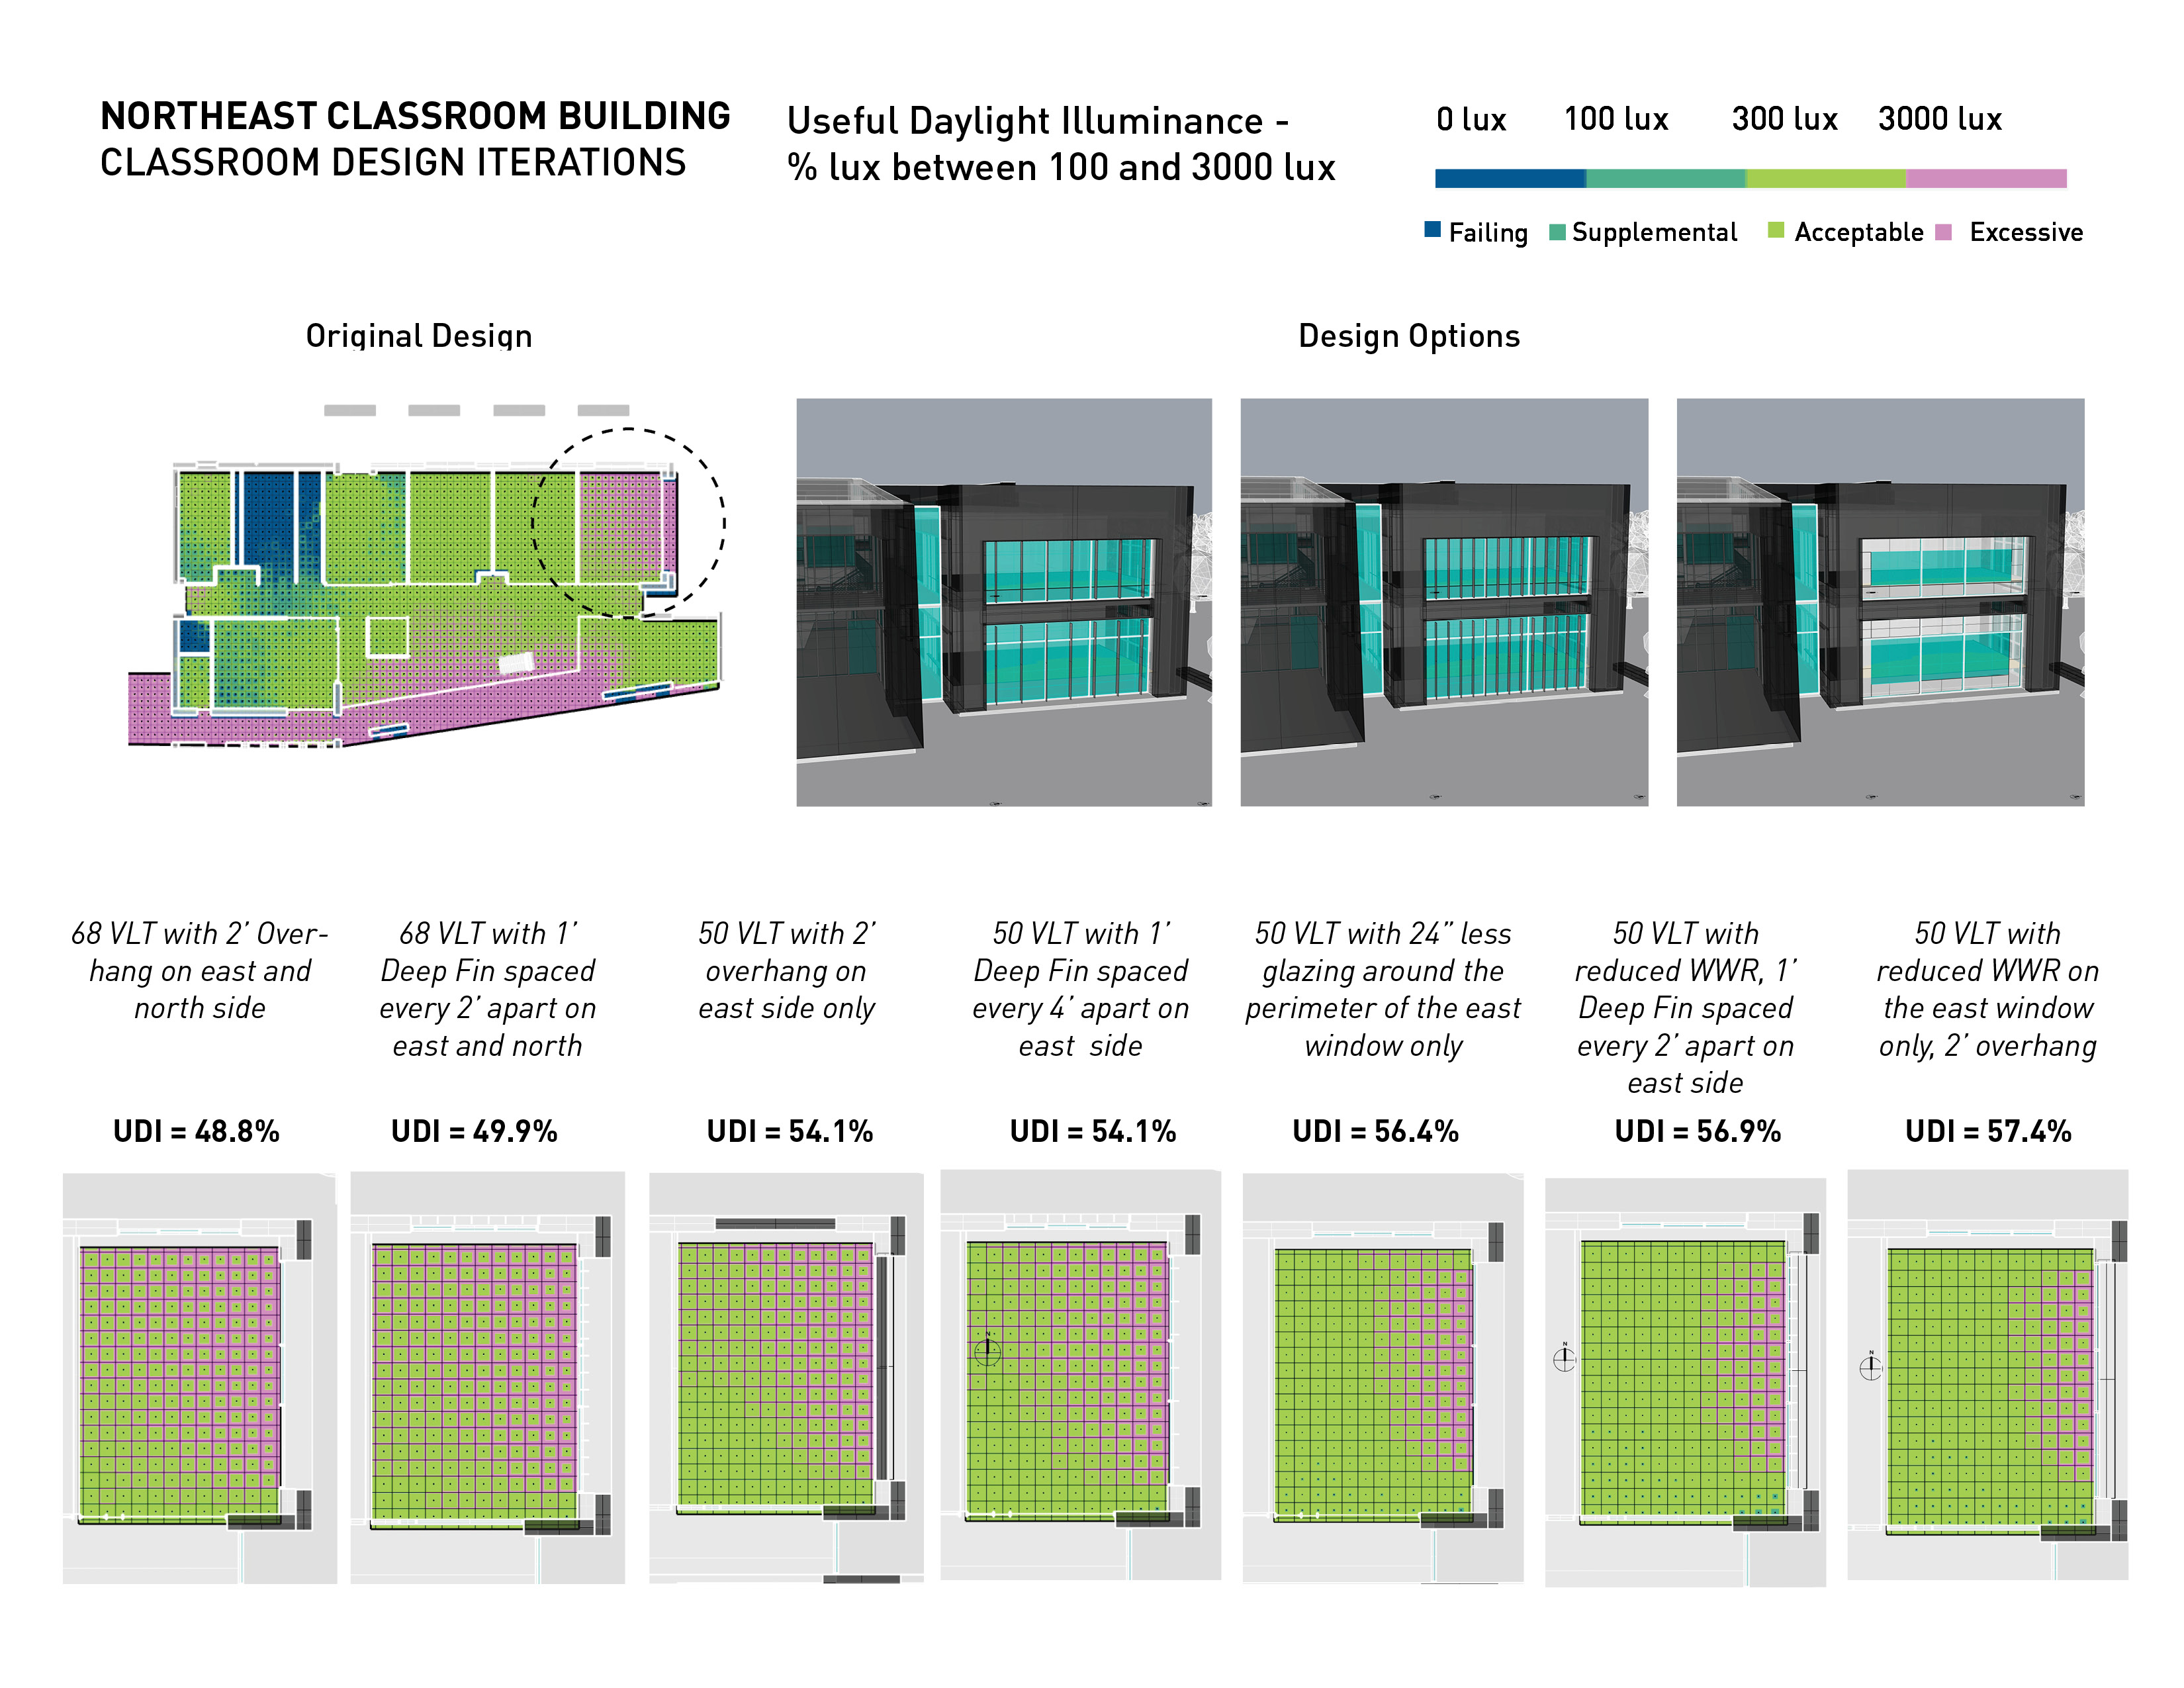 Progression of designs to maximize useful daylight for the northeast classroom building at Alamogordo Middle School.